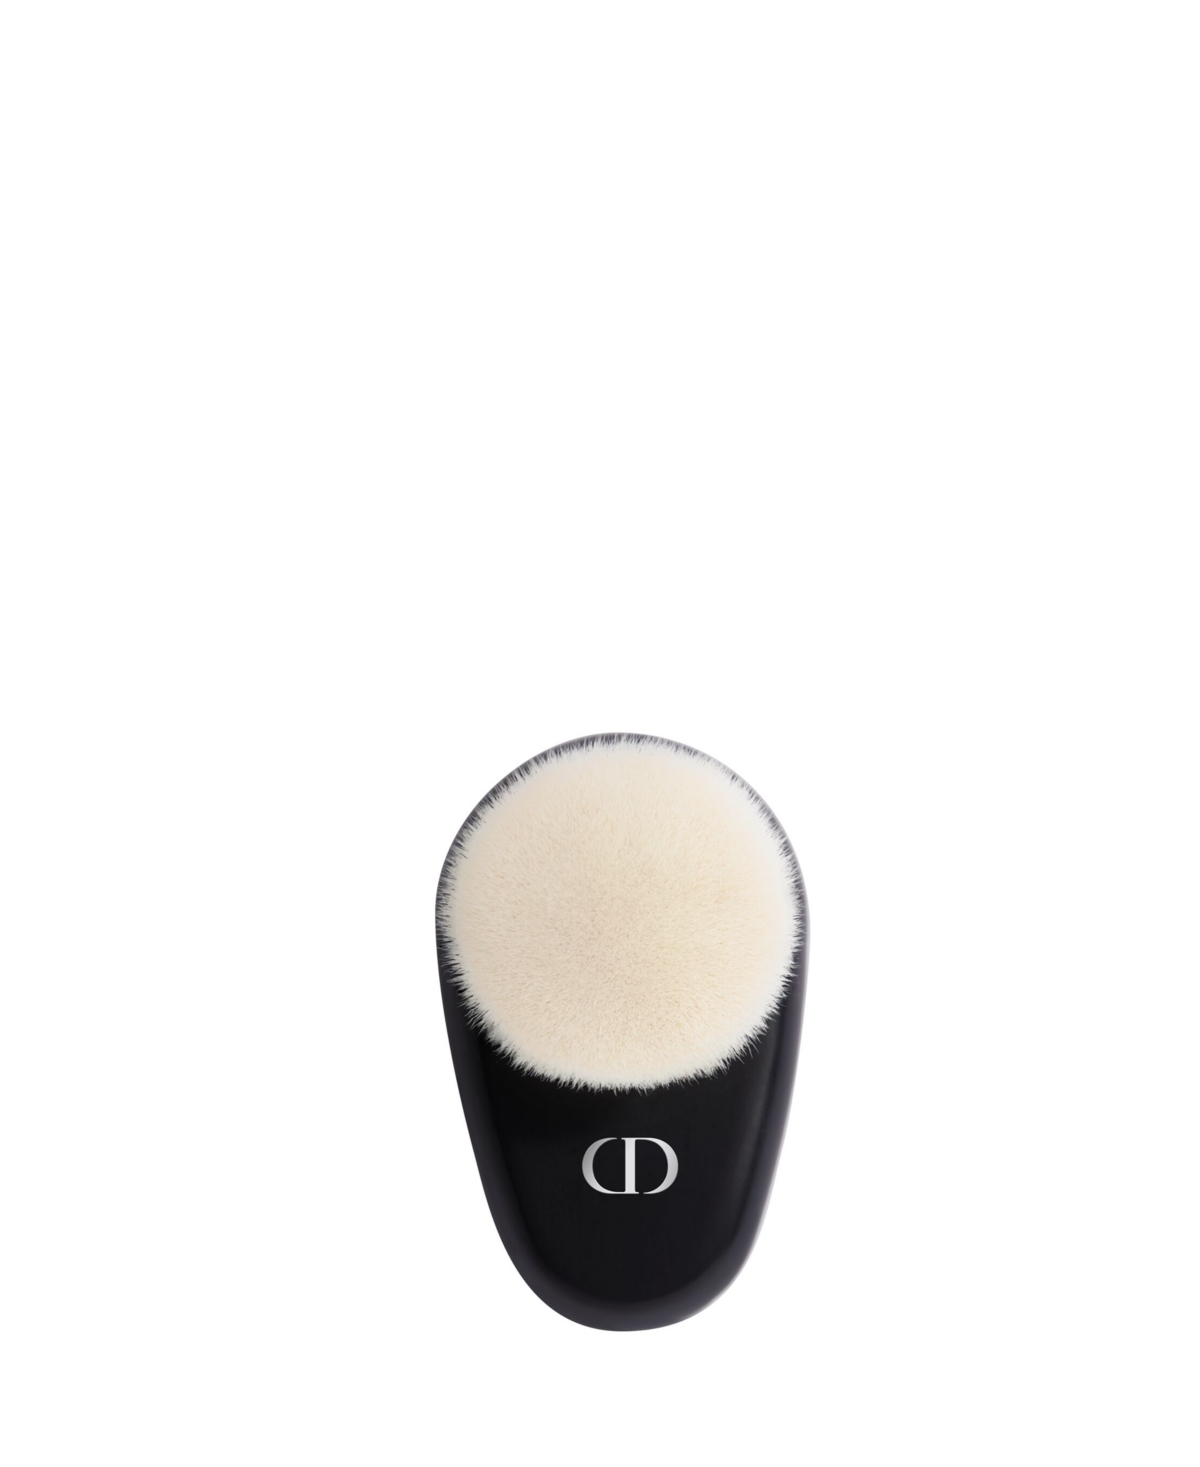 Dior Backstage Face Brush Nâ°18 In No Color